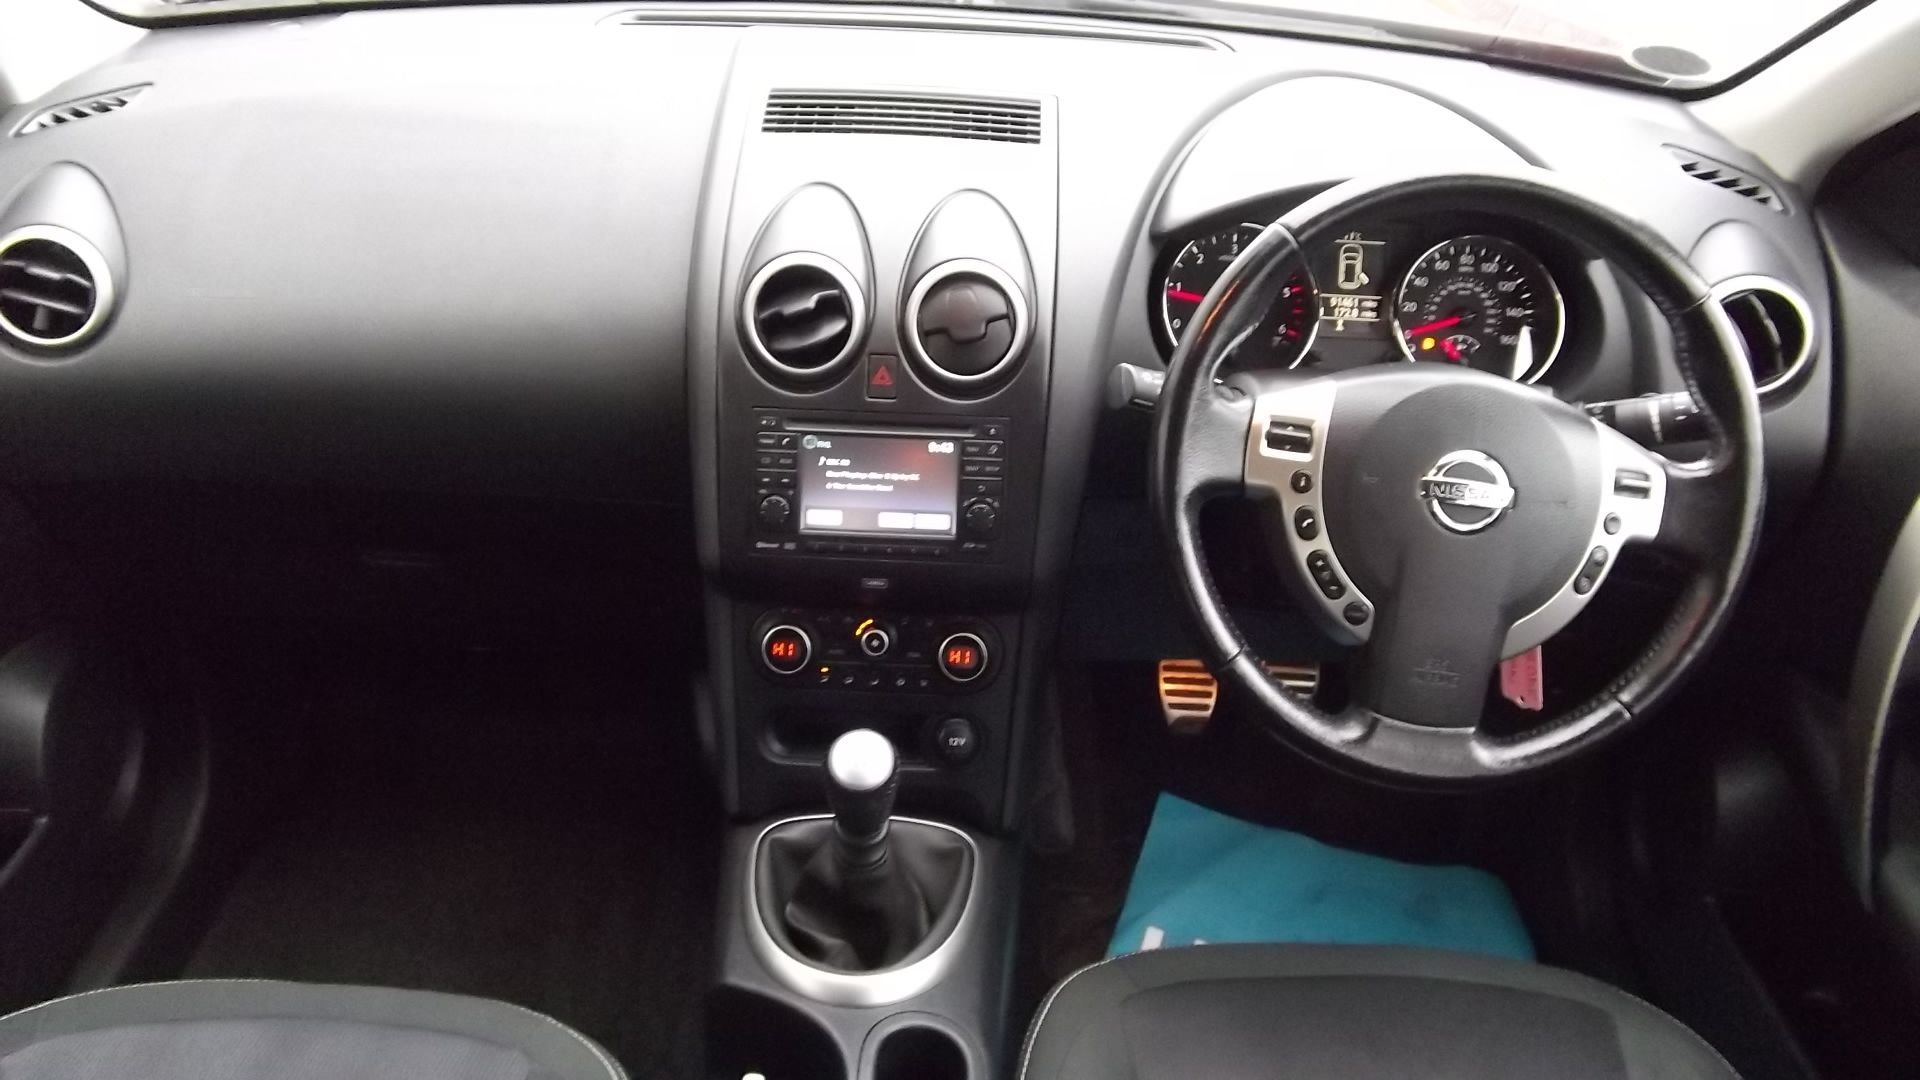 2012 Nissan Qashqai +2 N - Tech+Dci 5Dr 7-Seater SUV - CL505 - NO VAT ON THE HAMMER - - Image 21 of 23